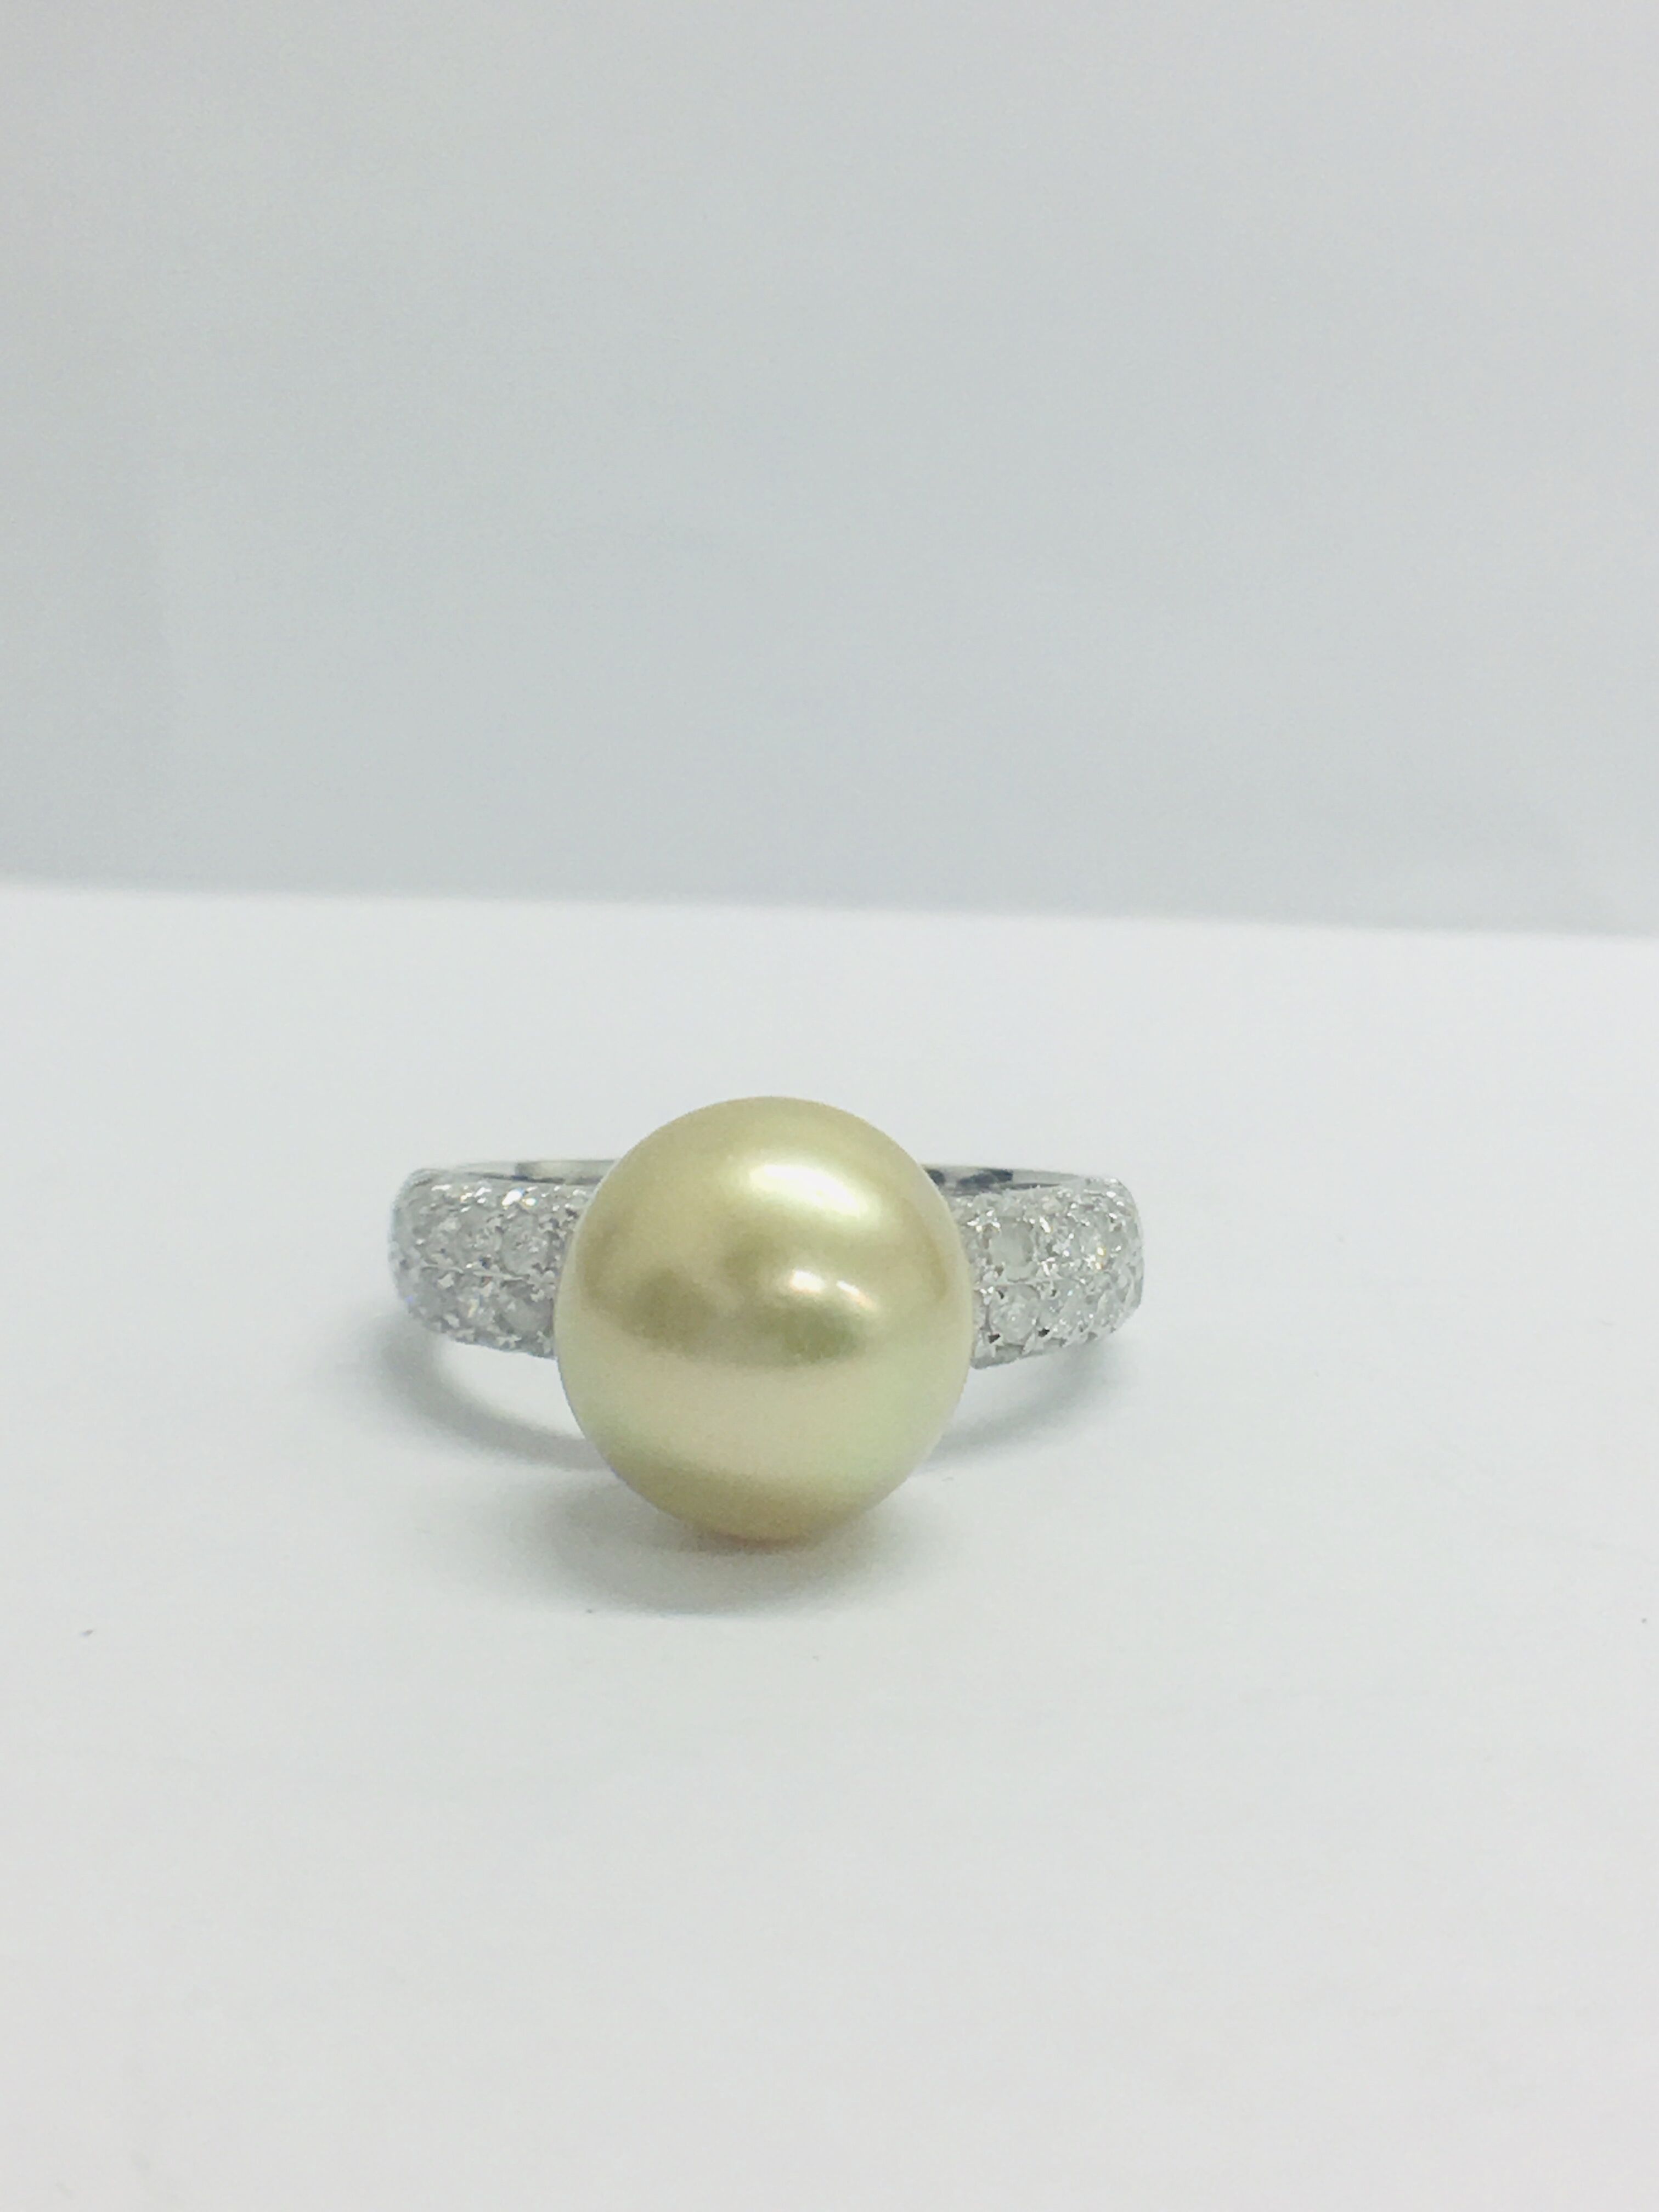 14ct White Gold Pearl & Diamond Ring - Image 2 of 11